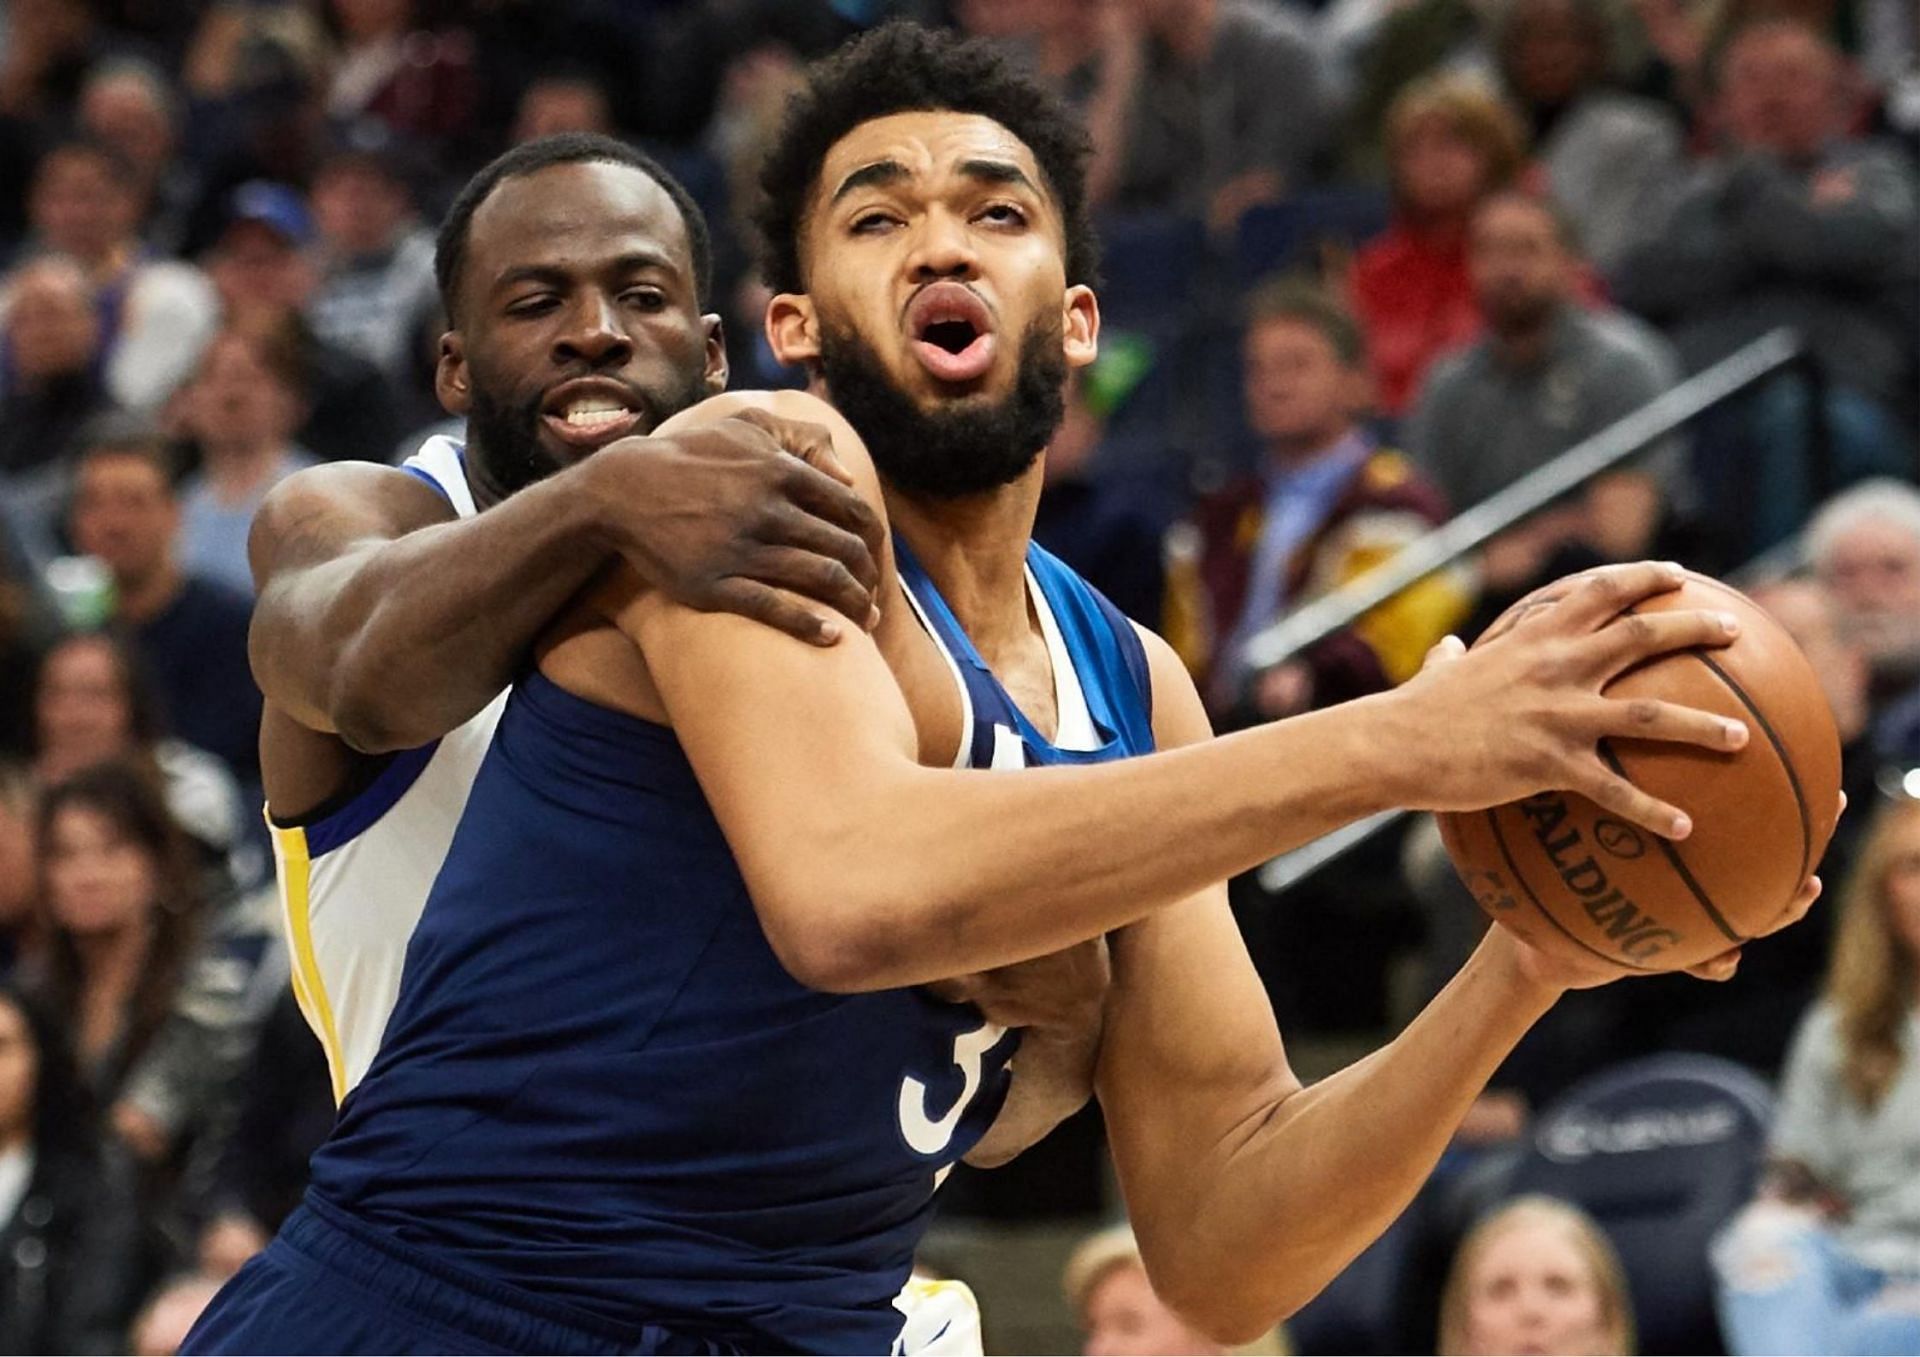 Karl-Anthony Towns, in just his second game back from a long injury layoff, scored the go-ahead three-pointer in the Minnesota Timberwolves win over the Golden State Warriors.